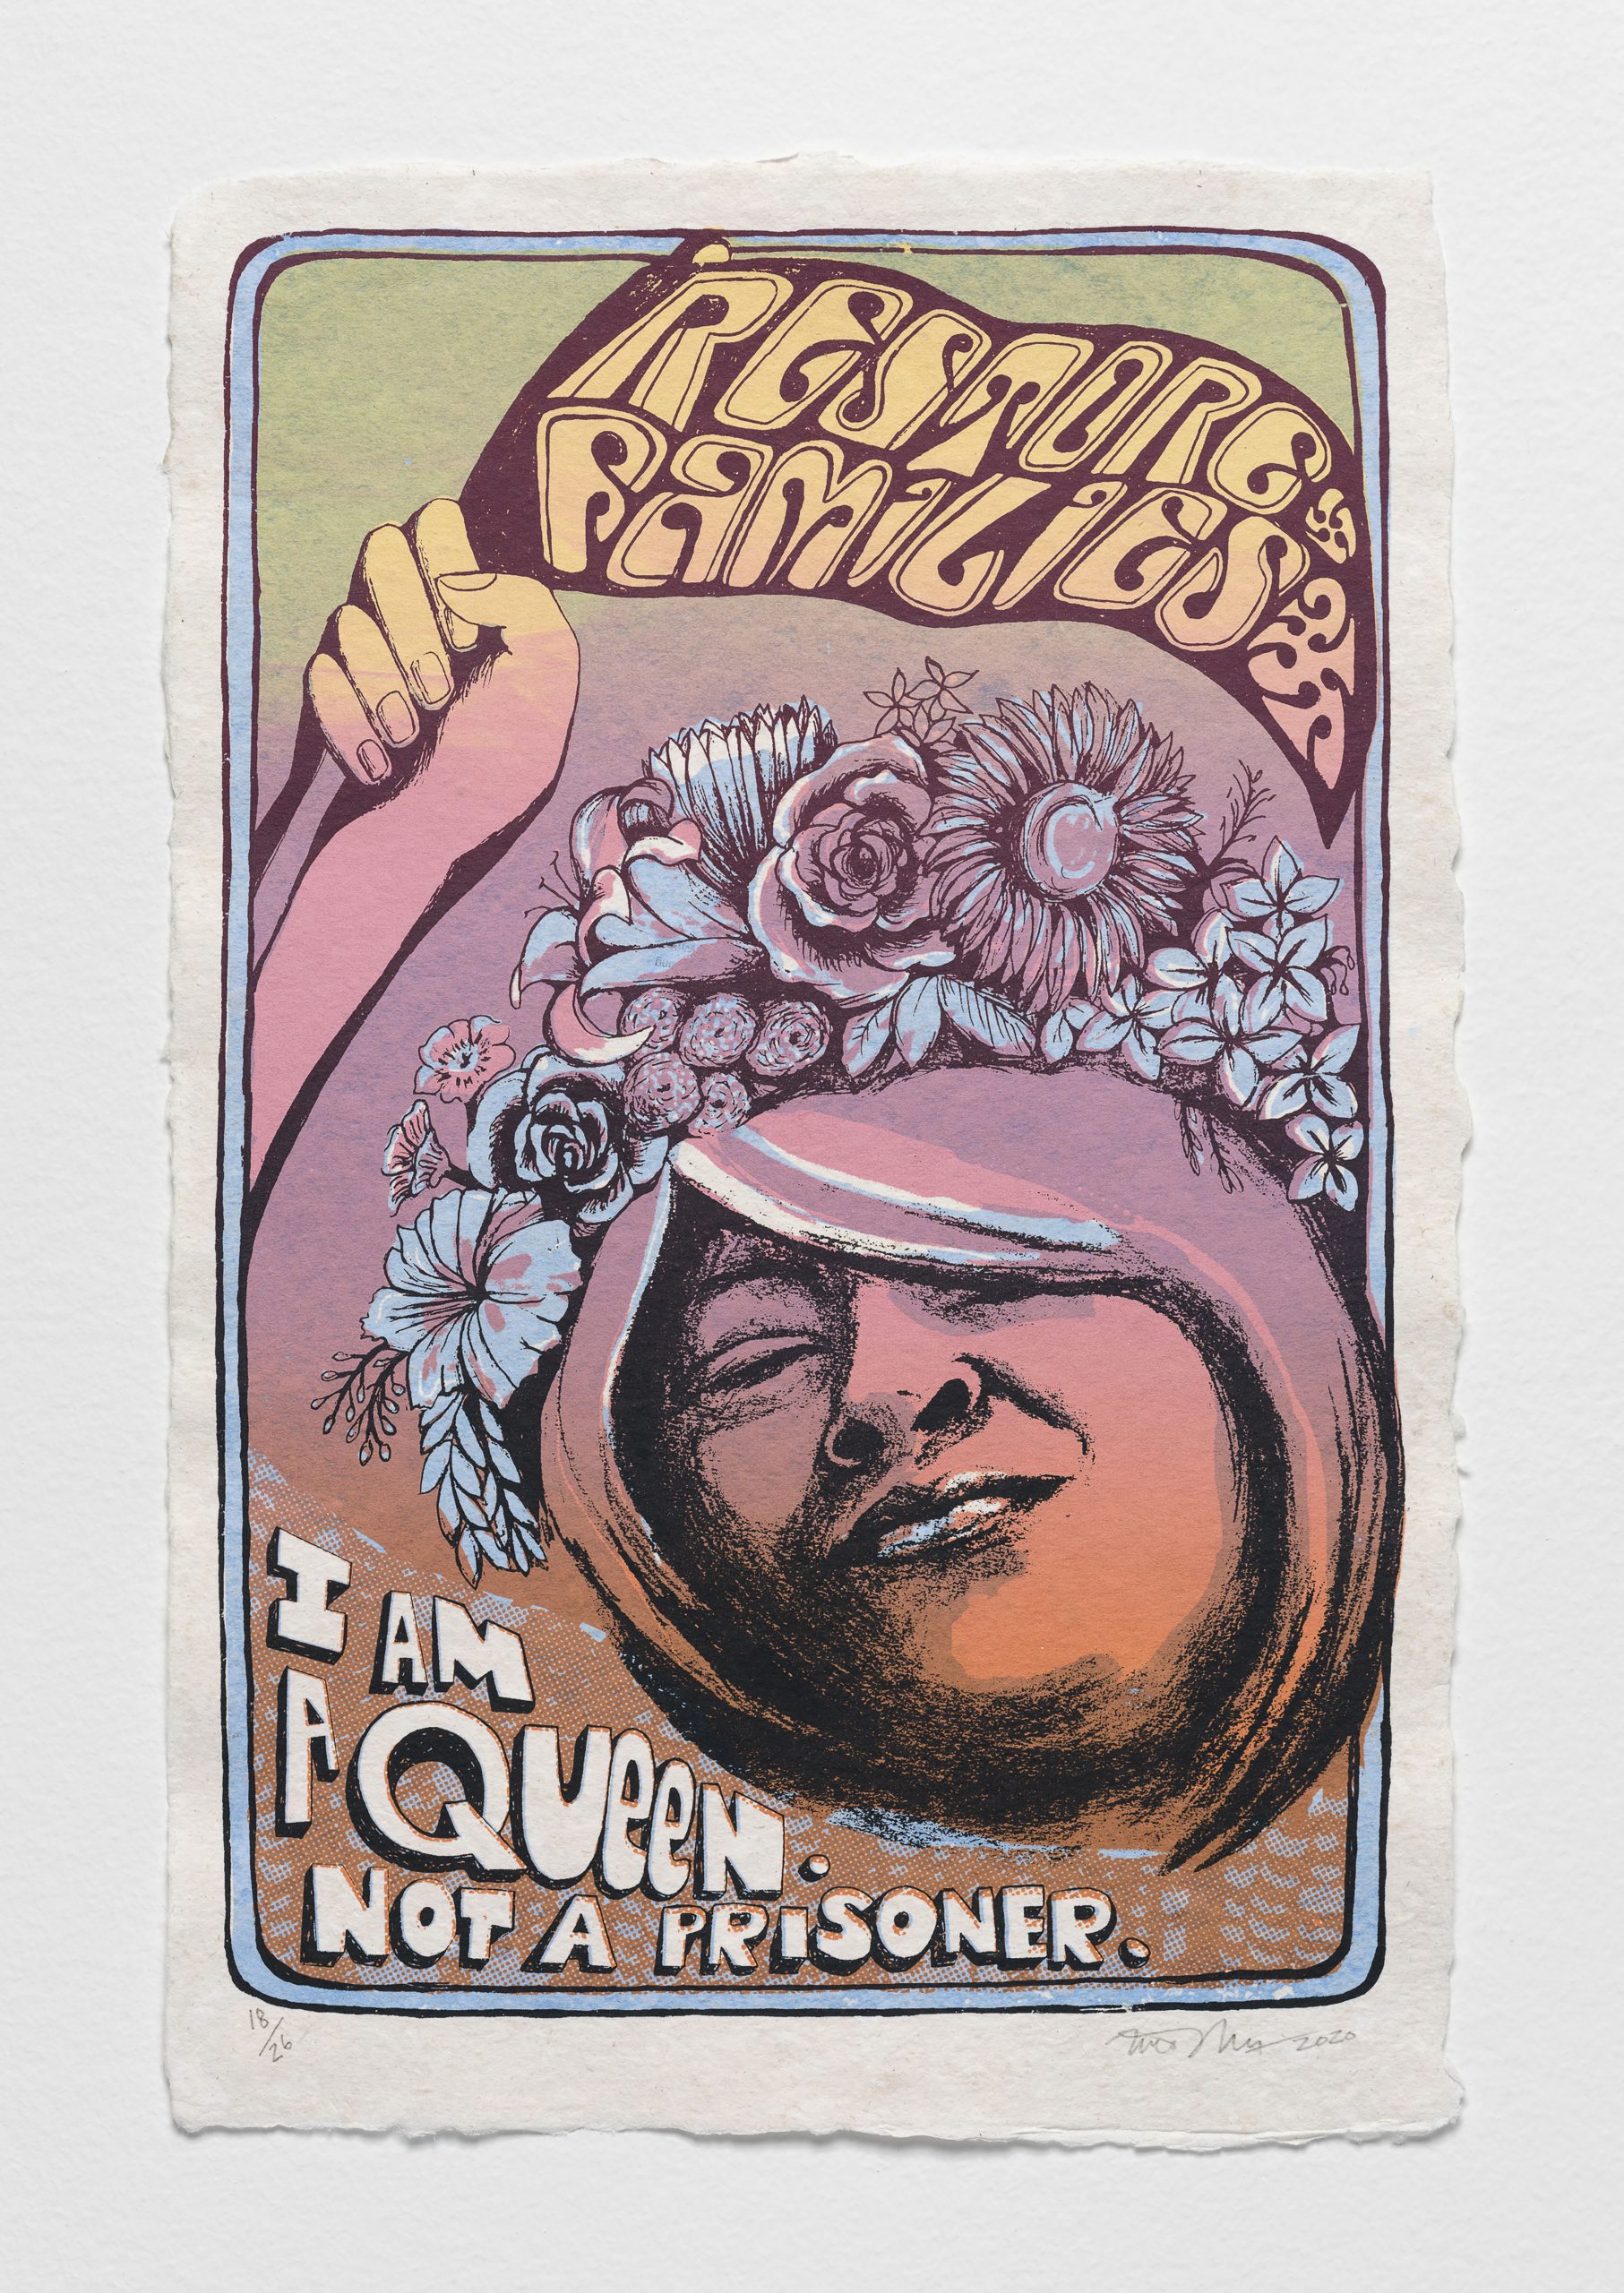 The smiling face of a woman wearing a crown of flowers, with her chin raised in an expression of strength, screen printed on paper made from criminal records. A banner she holds reads, 